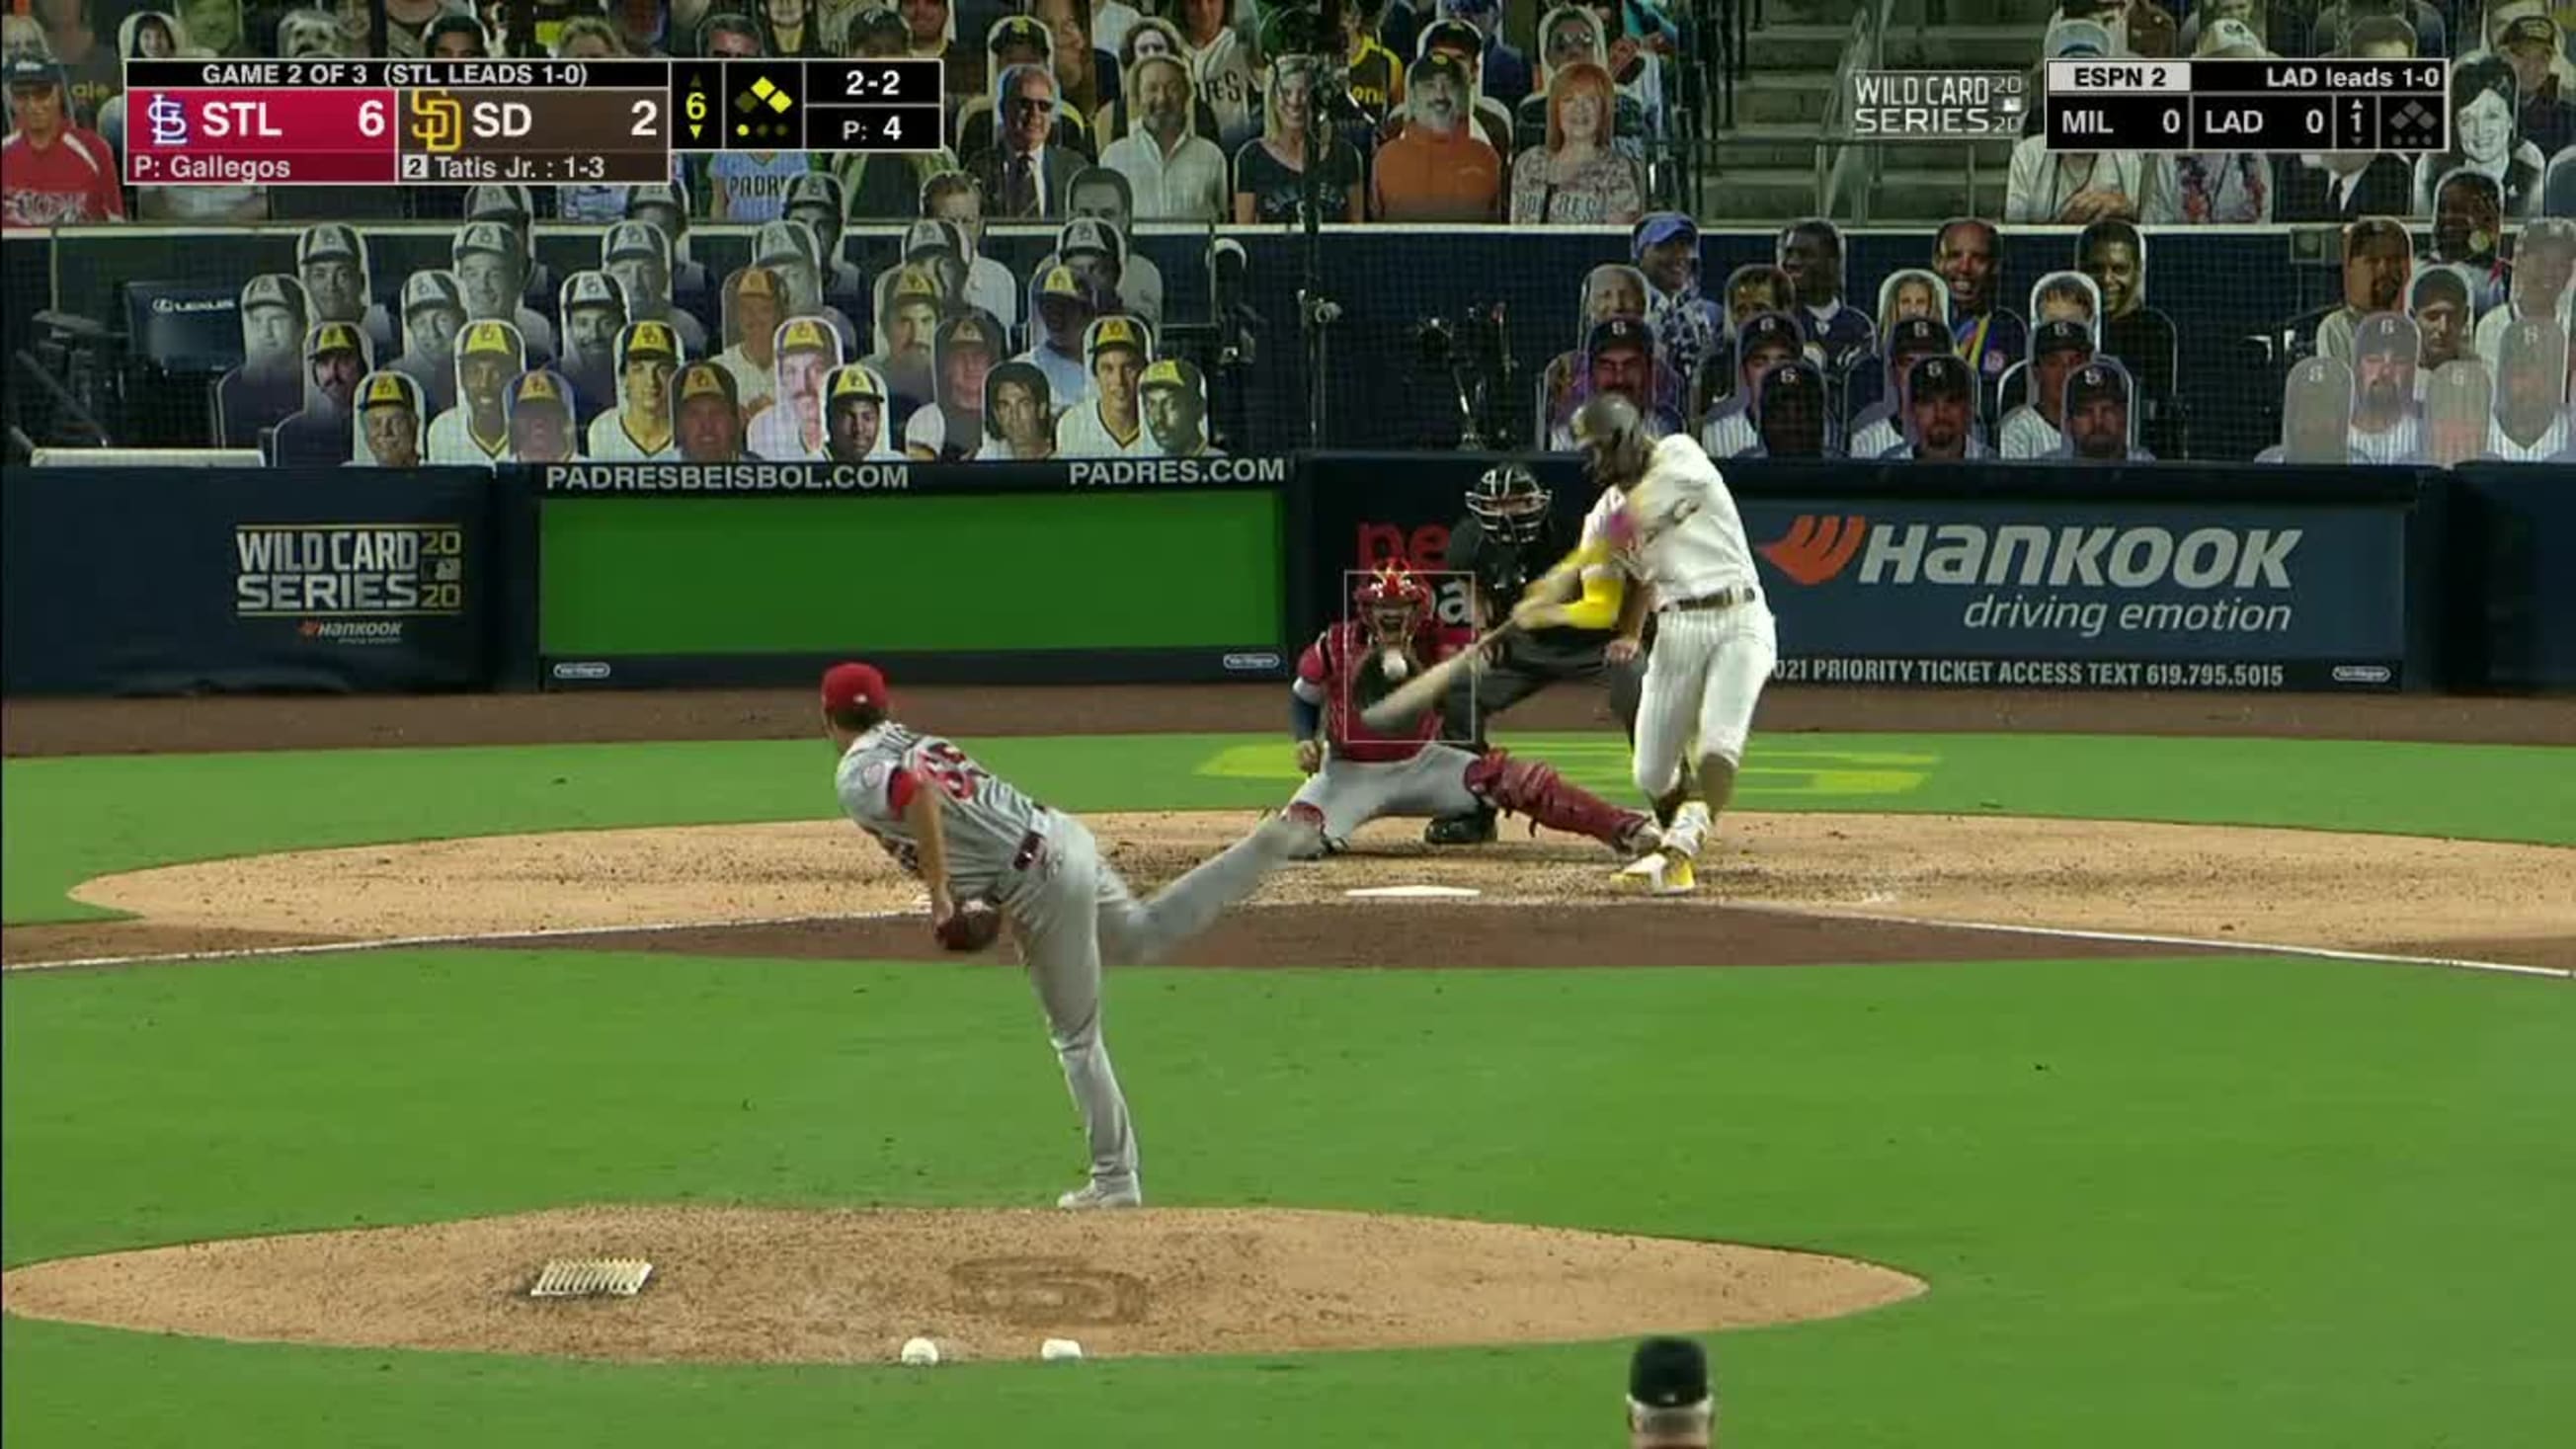 Padres' Fernando Tatís Jr. moves to outfield, GOES OFF! (2 homers, 4 hits)  